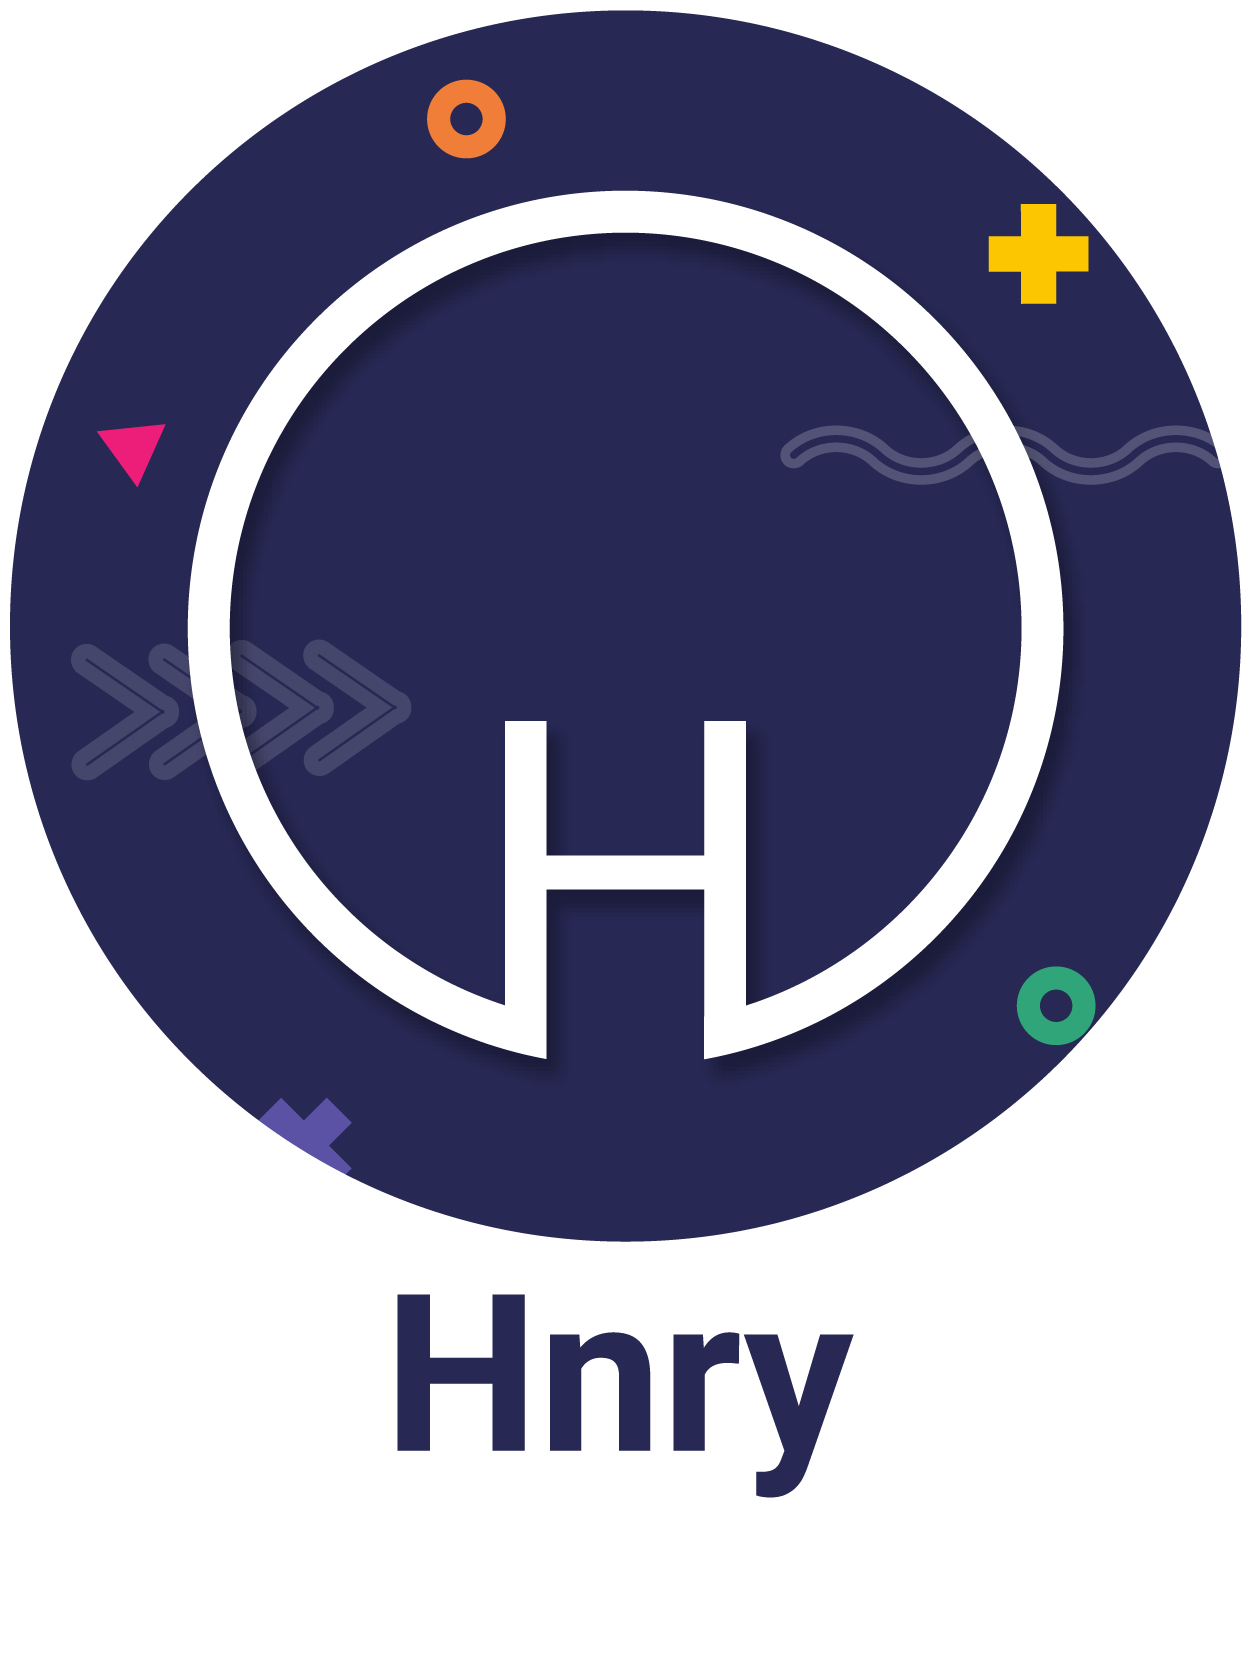 HNRY freelance, contractor and sole trader accounting software